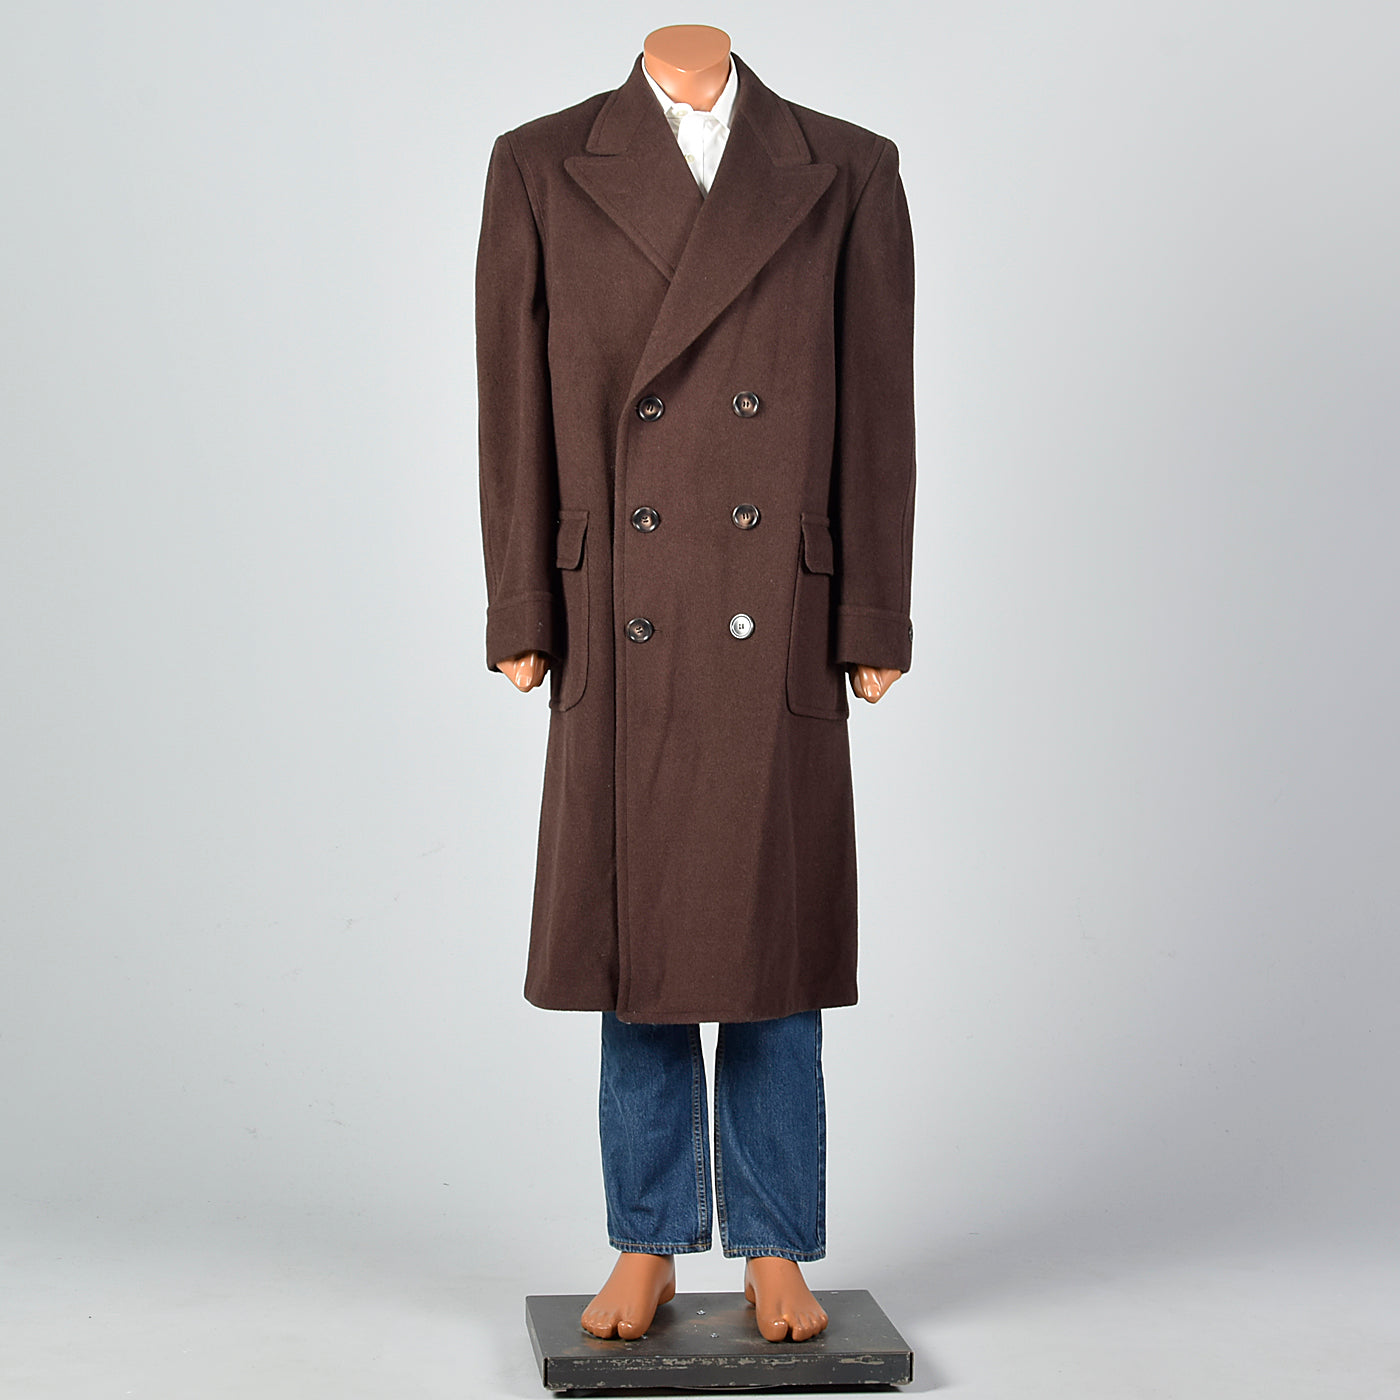 1950s Mens Brown Overcoat by Richman Brothers